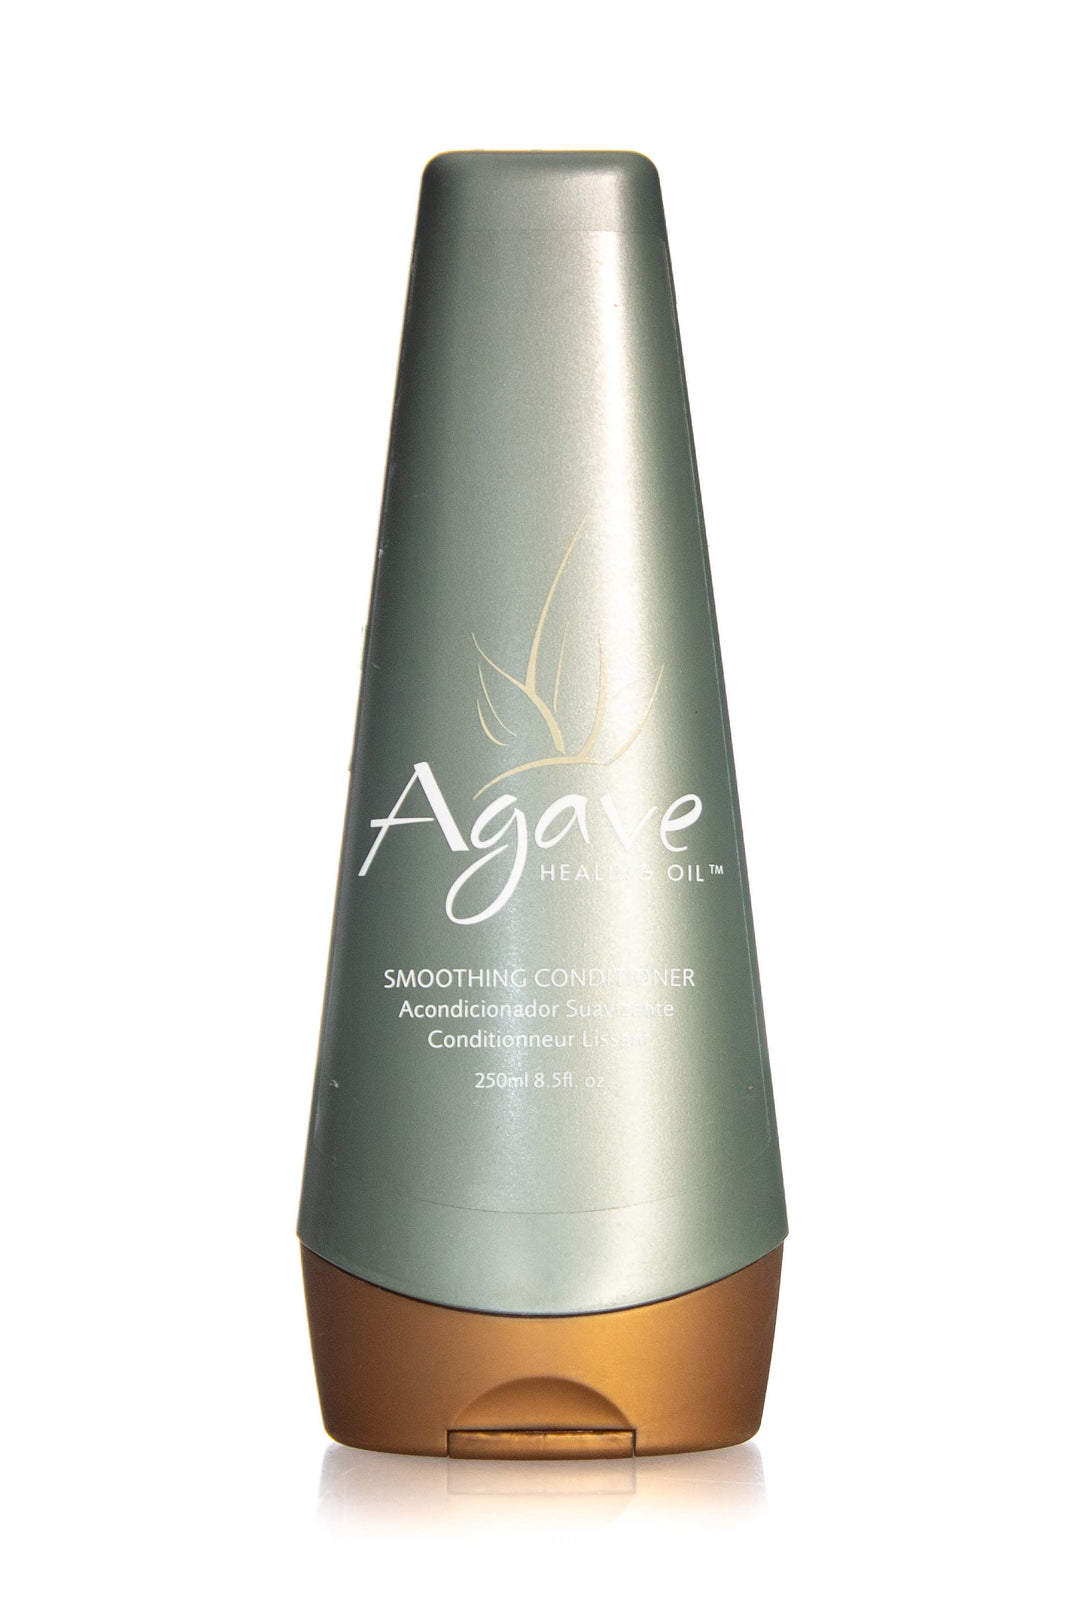 AGAVE Healing Oil Smoothing Conditioner | 250ml